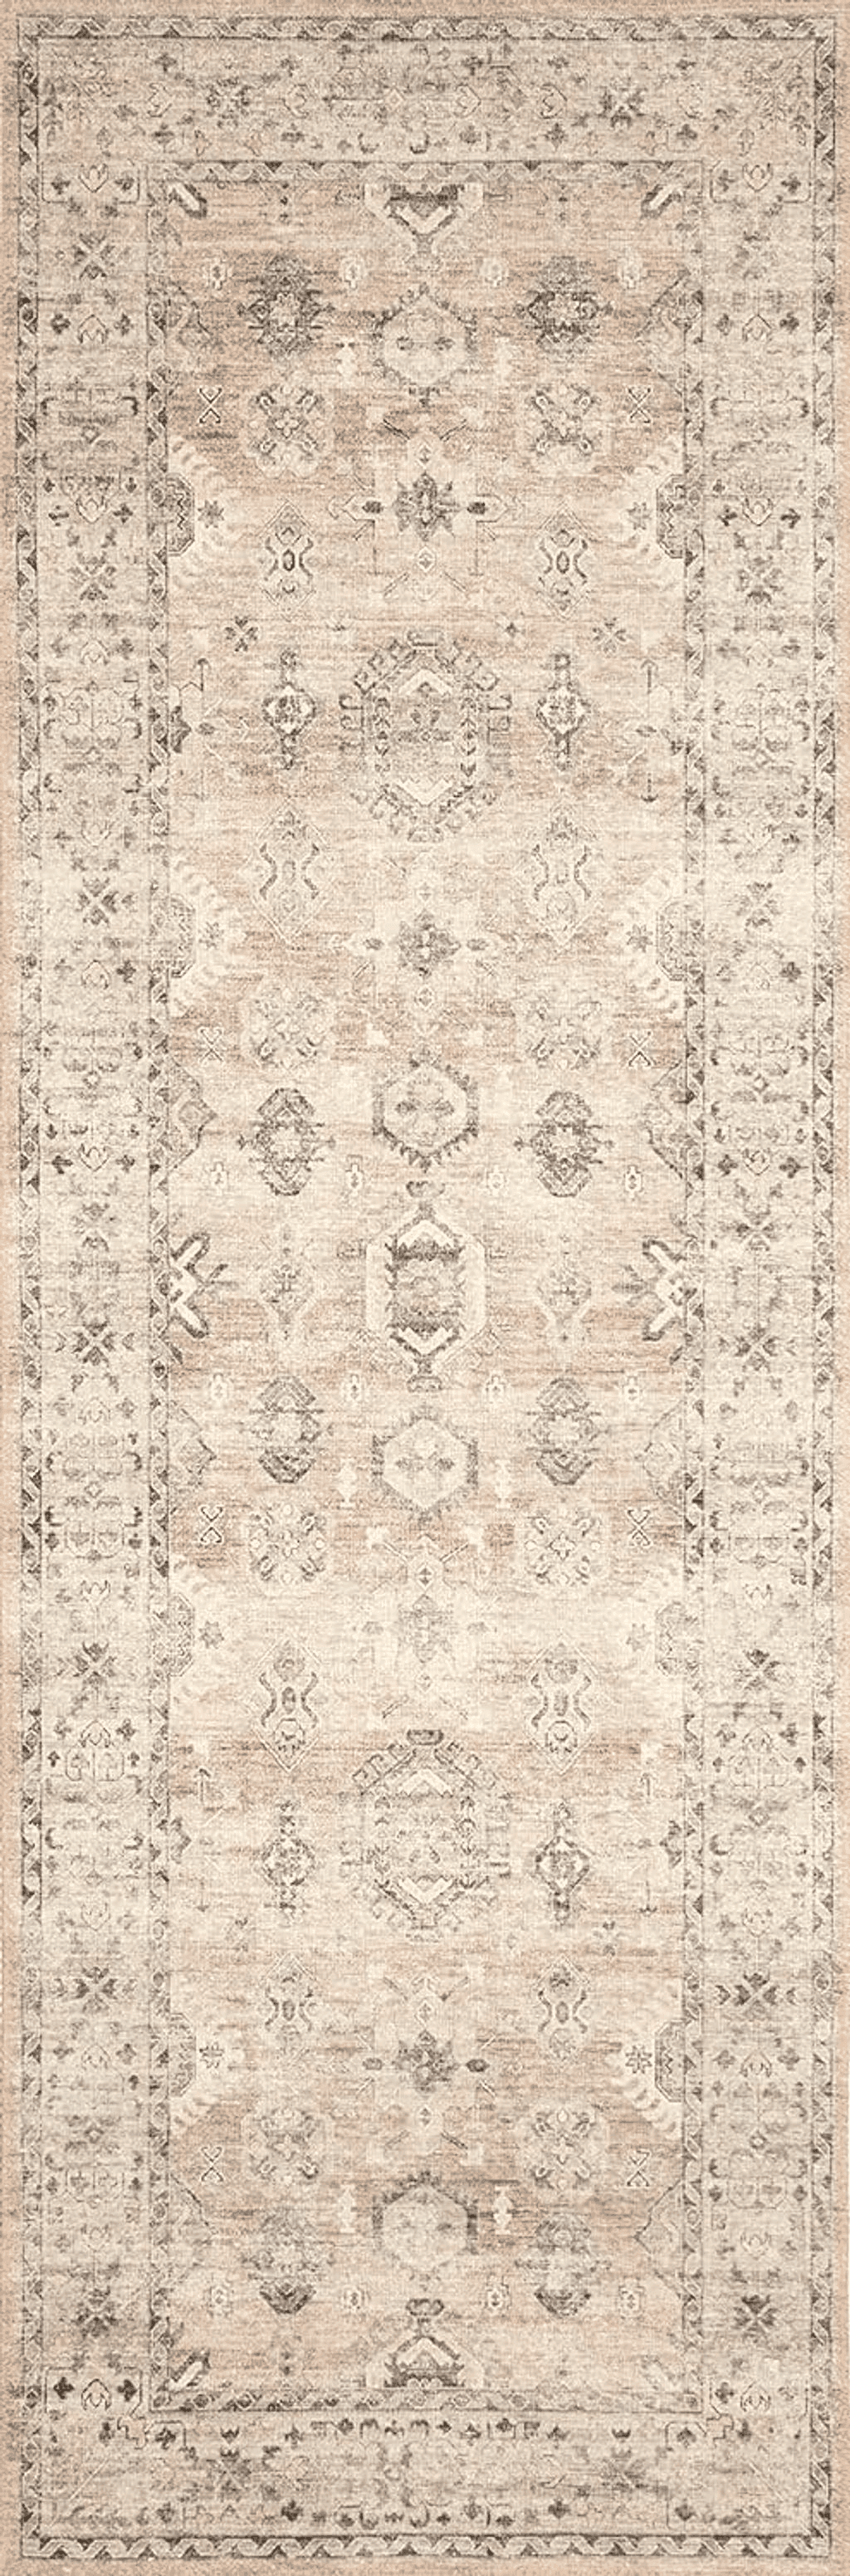 Loloi II Hathaway Collection HTH-03 Java/Multi, Traditional 2'-6" x 7'-6" Runner Rug